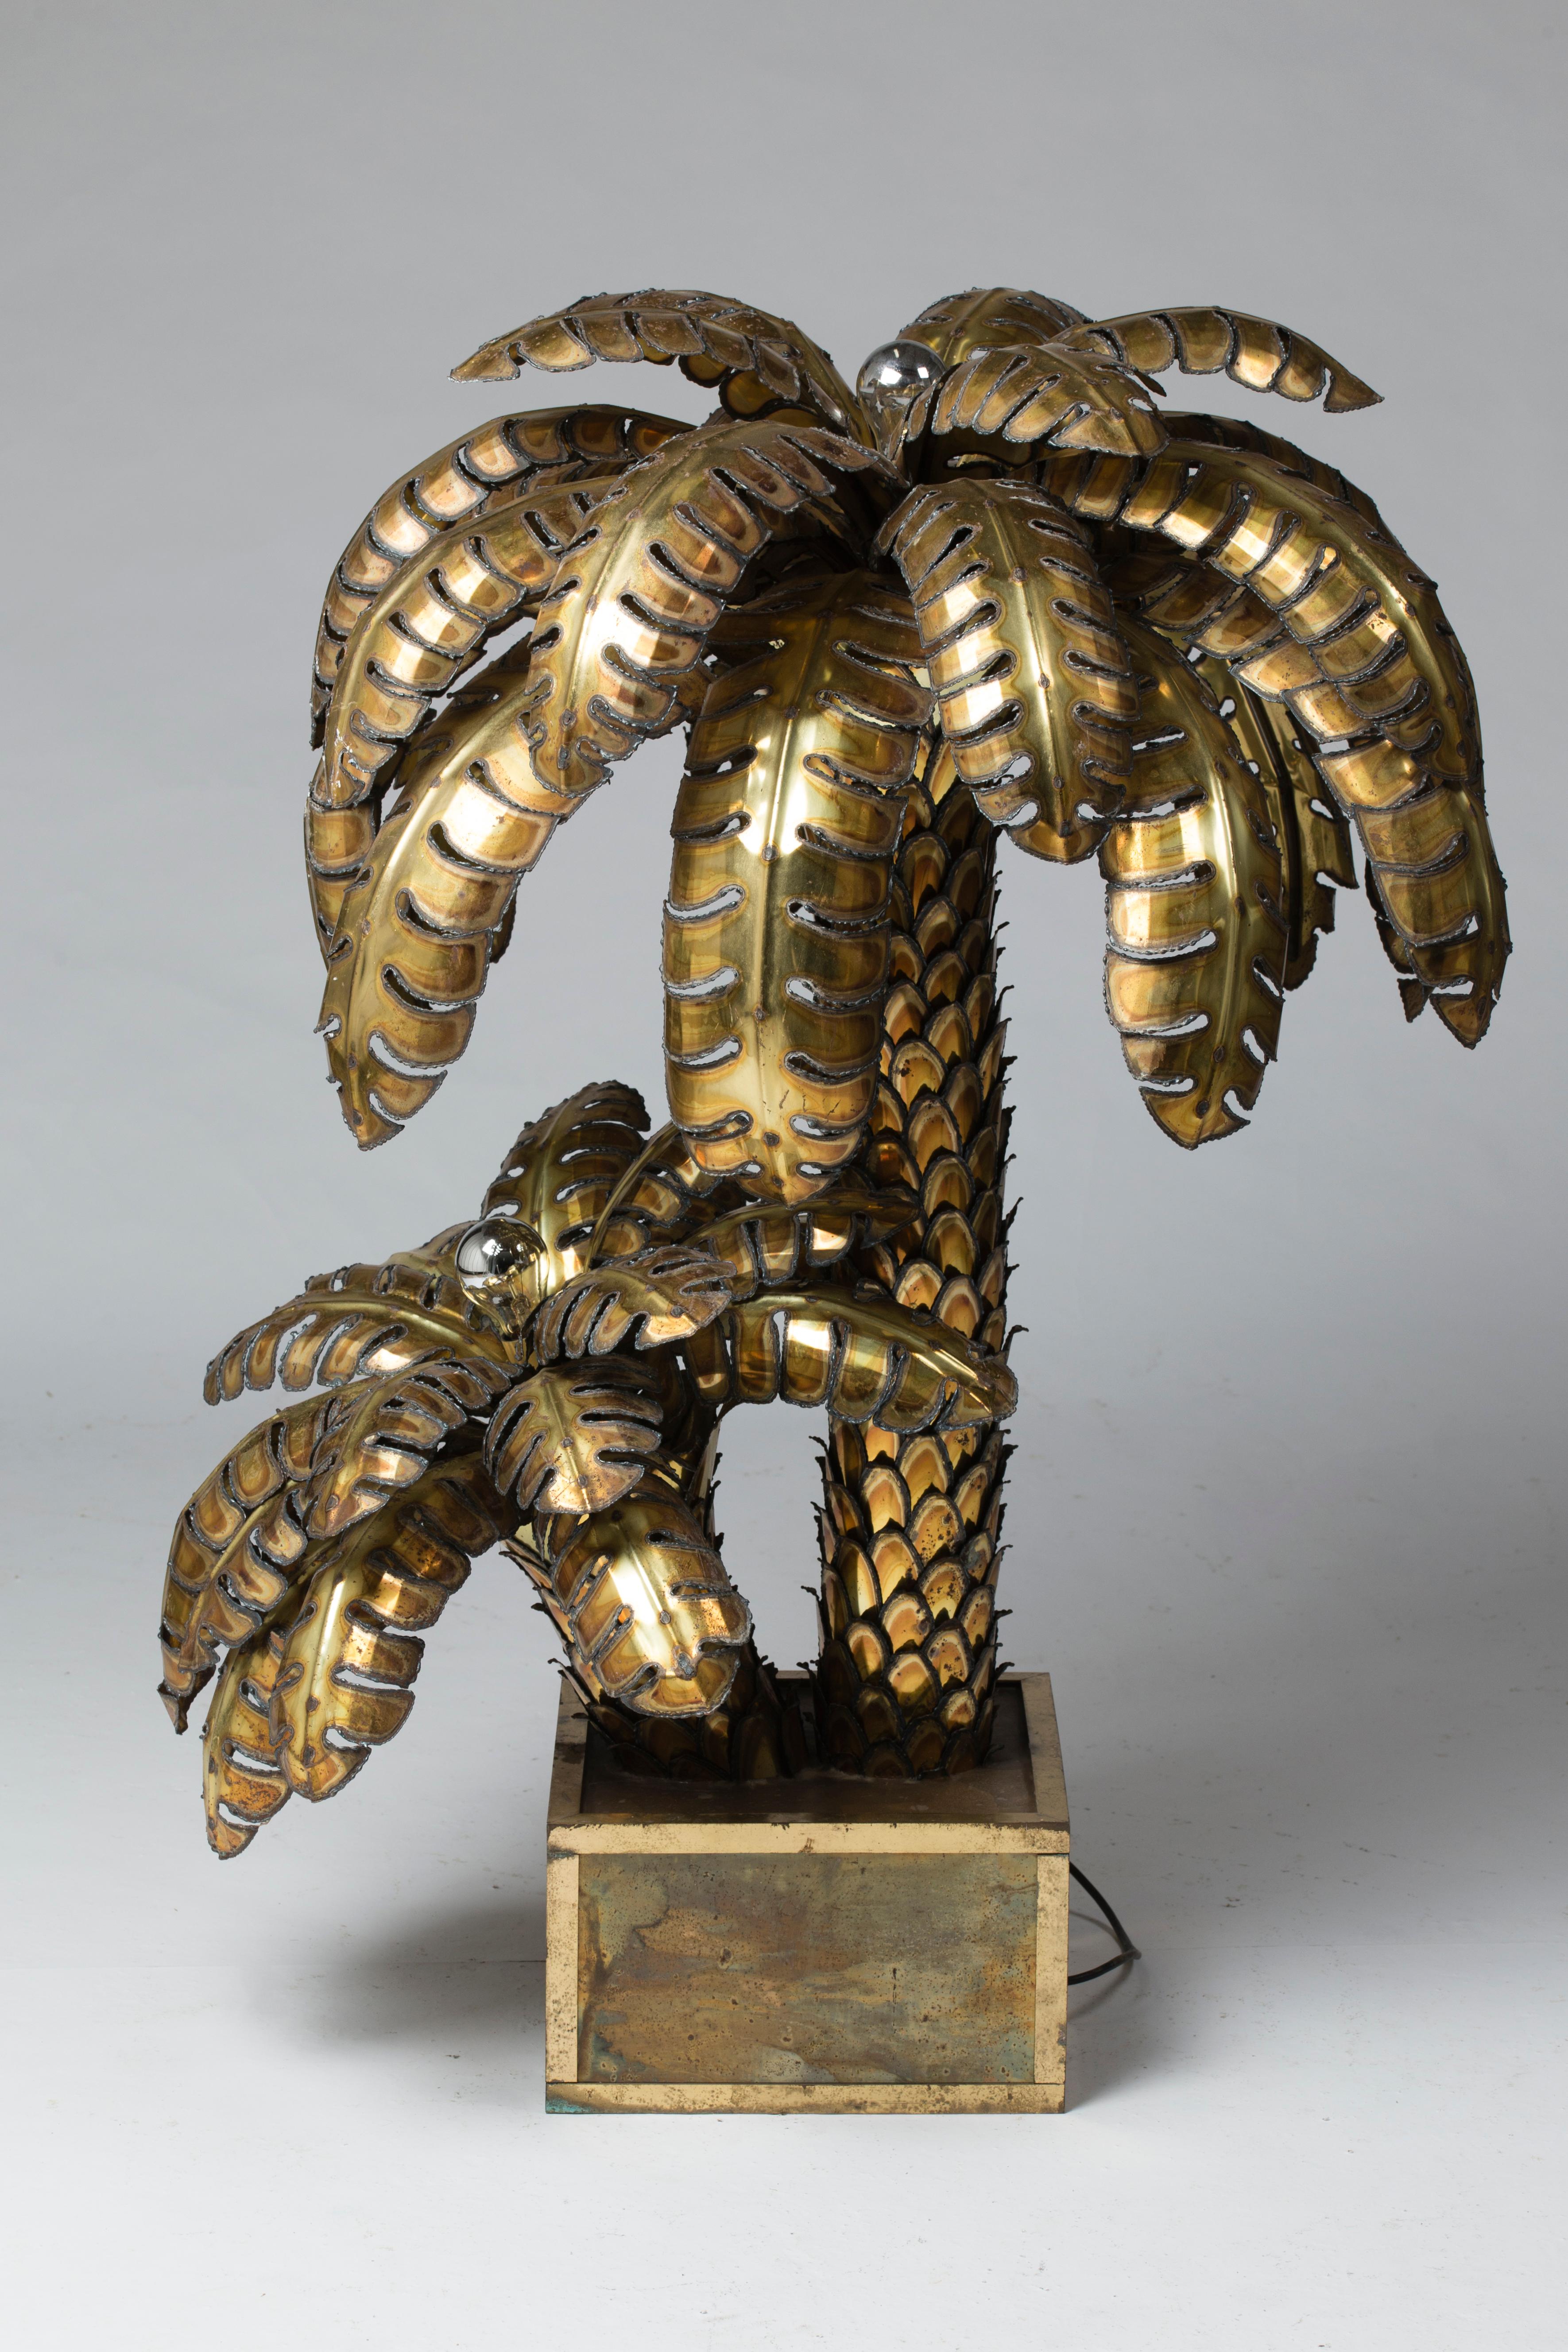 Rare palm tree table lamp with two heads, gilt and patinated iron in a square planter in oxidized brass, lined with a polished brass angle.
France, circa 1970.

Measures: Diameter 33.5 in
Height 45.3 in.